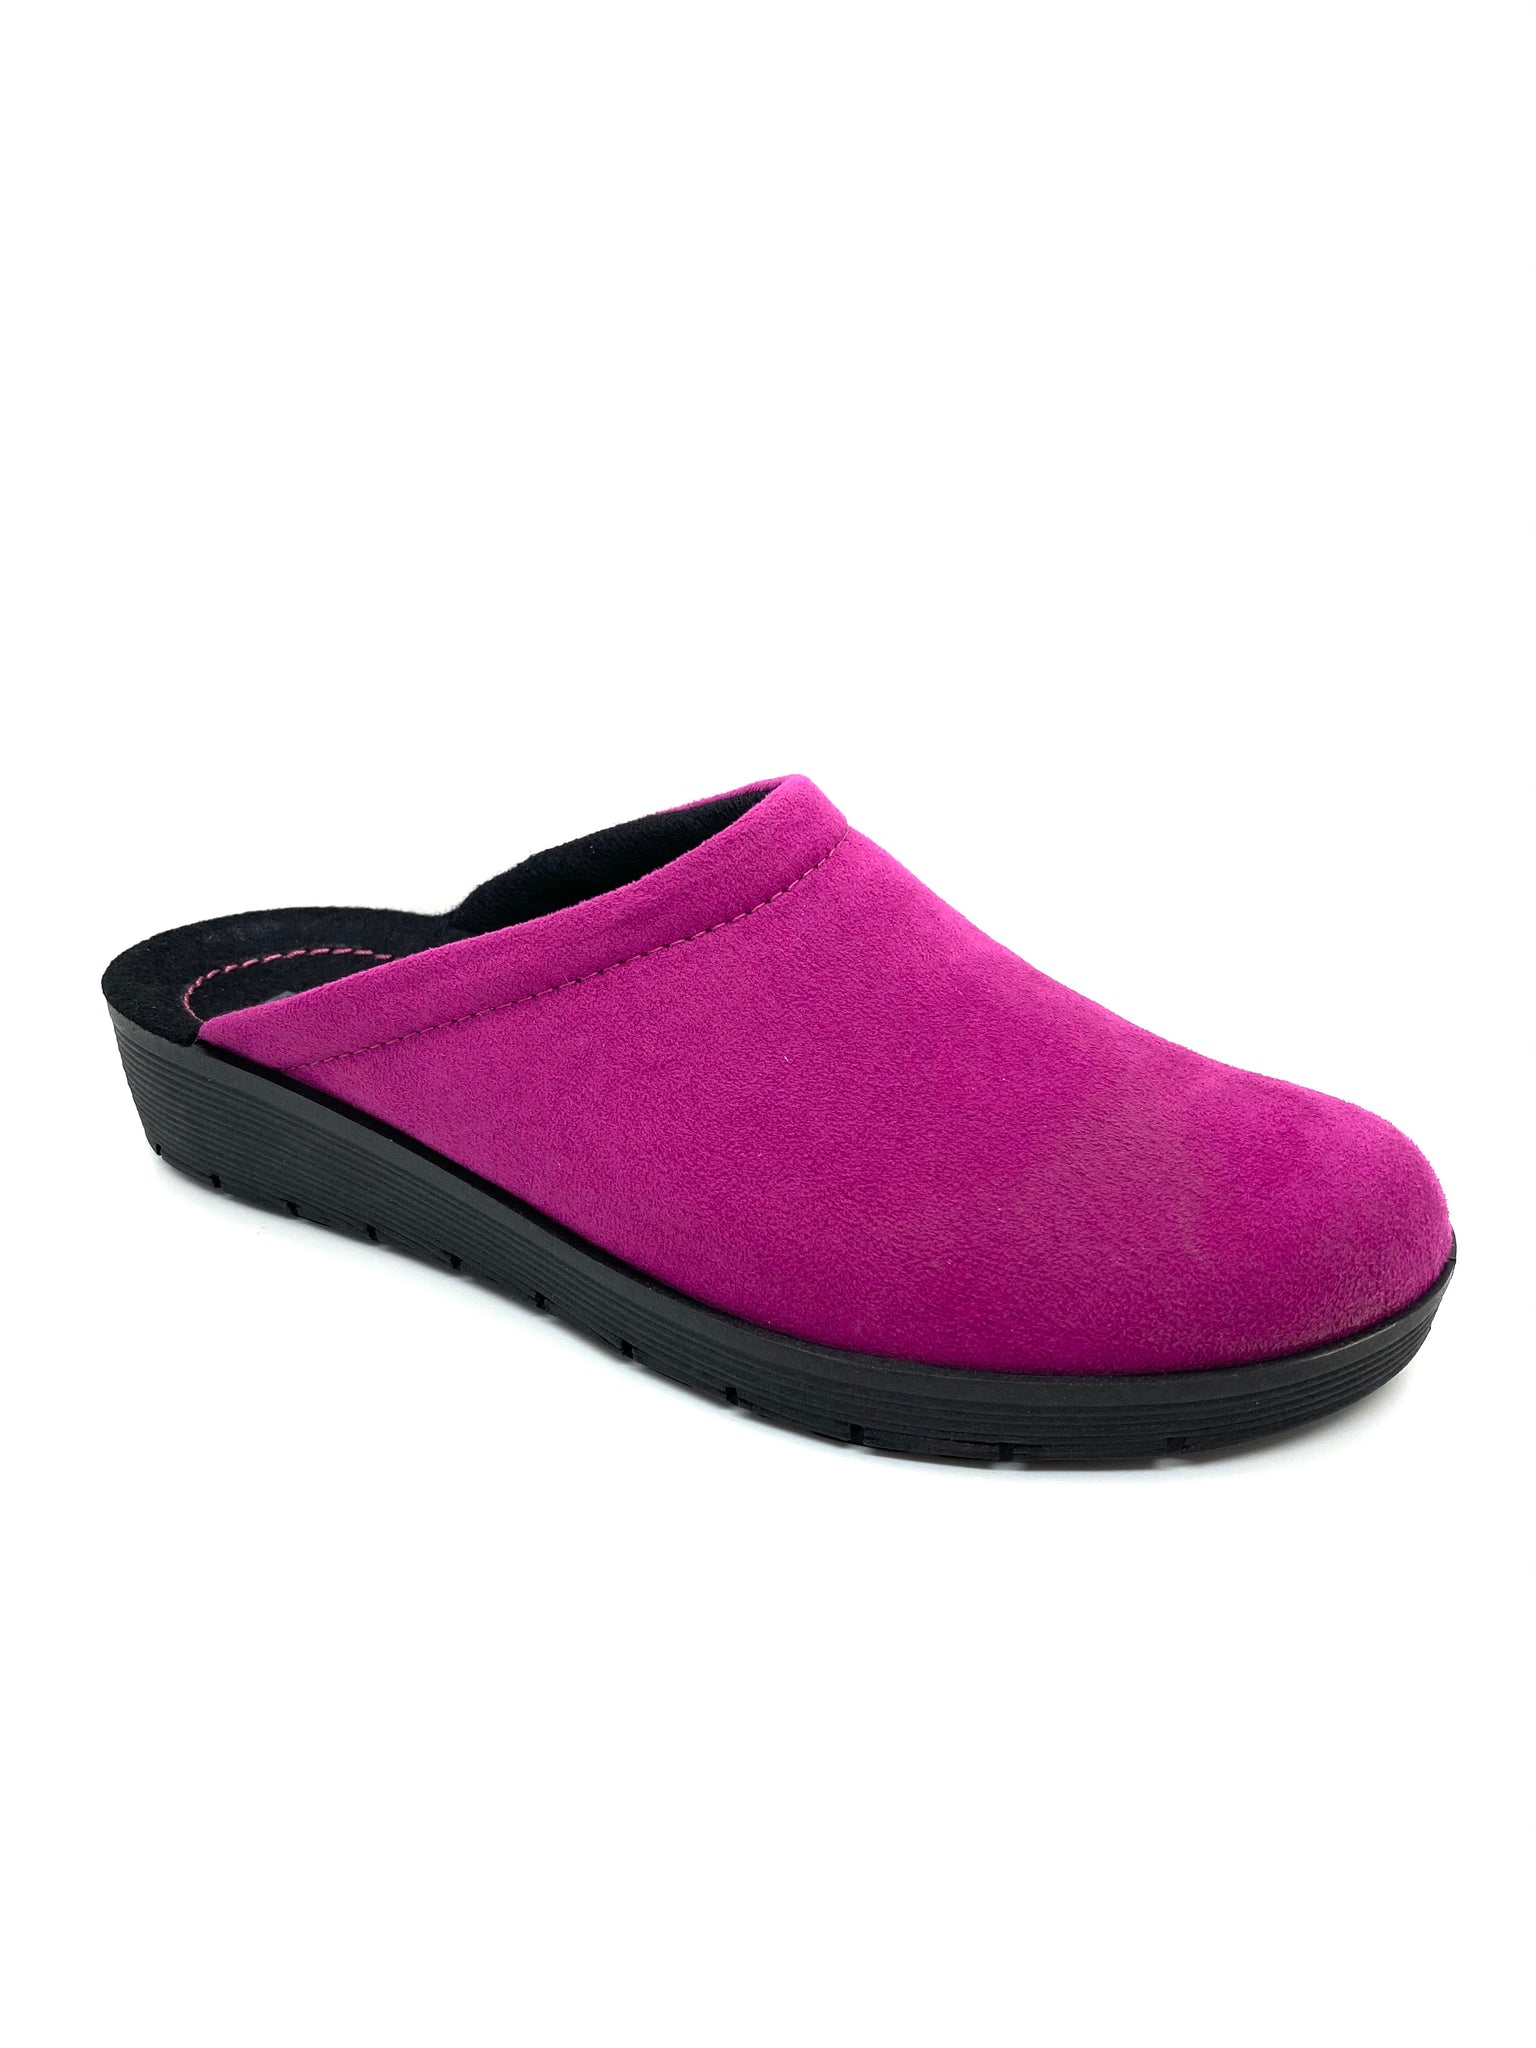 Rohde Ladies Pink Backless Slipper